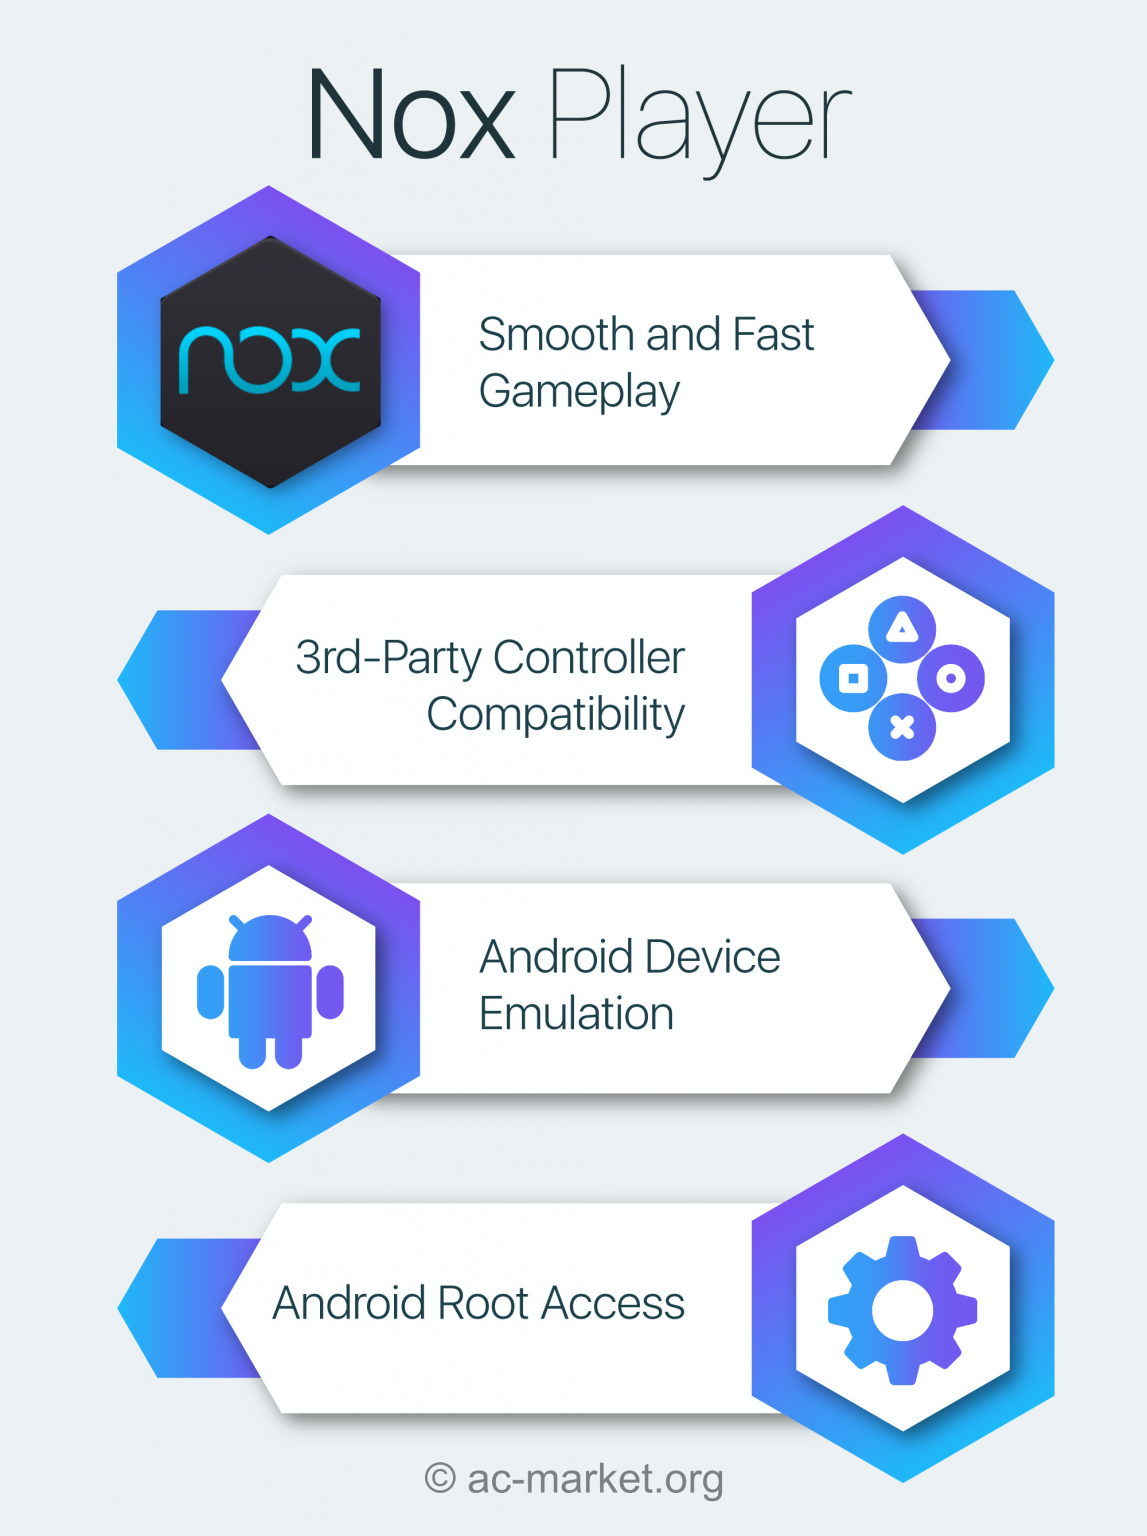 nox app player system requirements